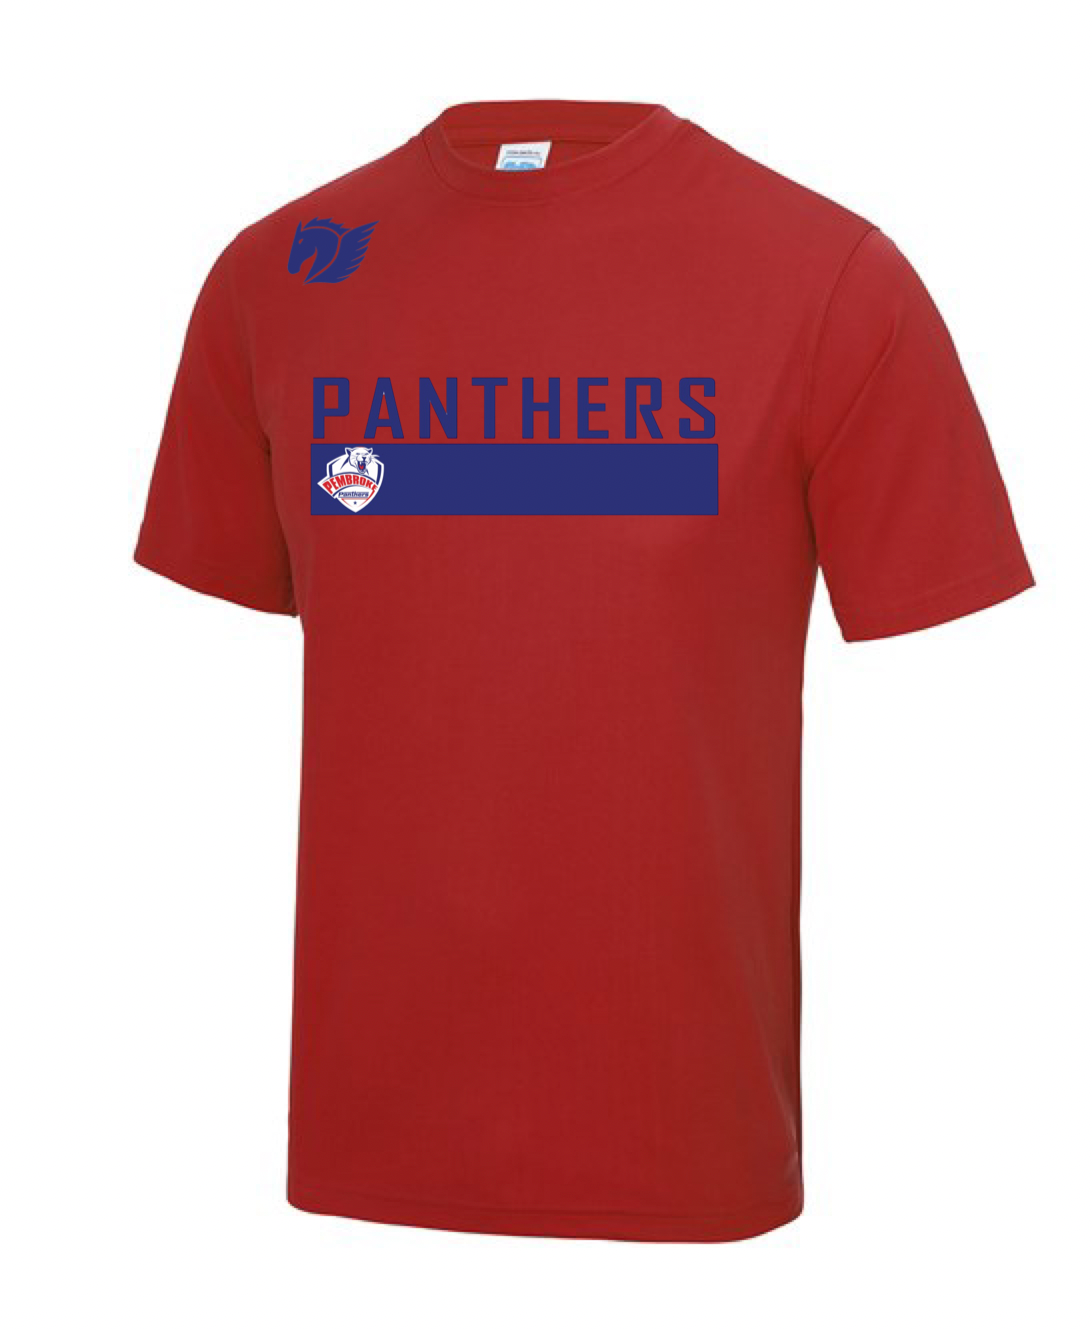 Pembroke Panthers Supporters Shirt